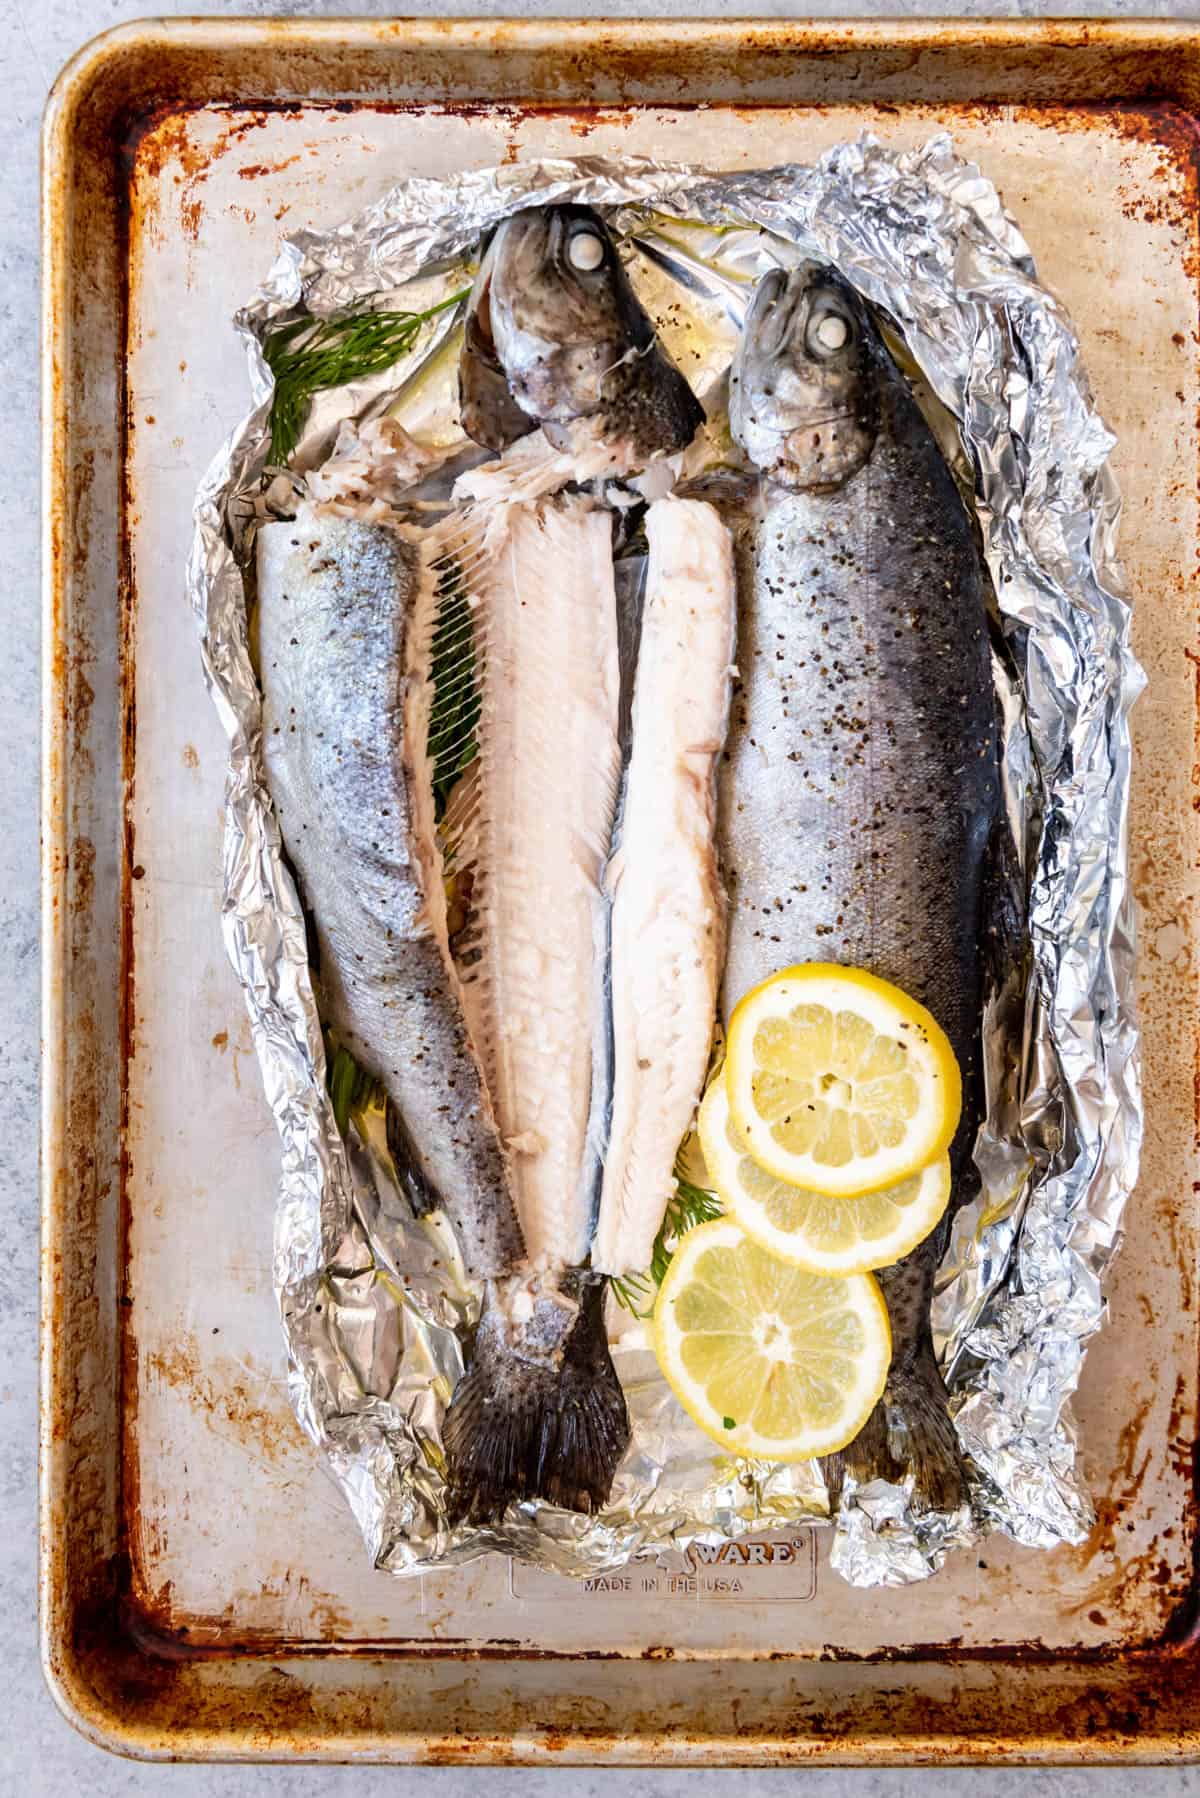 An image of baked rainbow trout on a baking sheet.